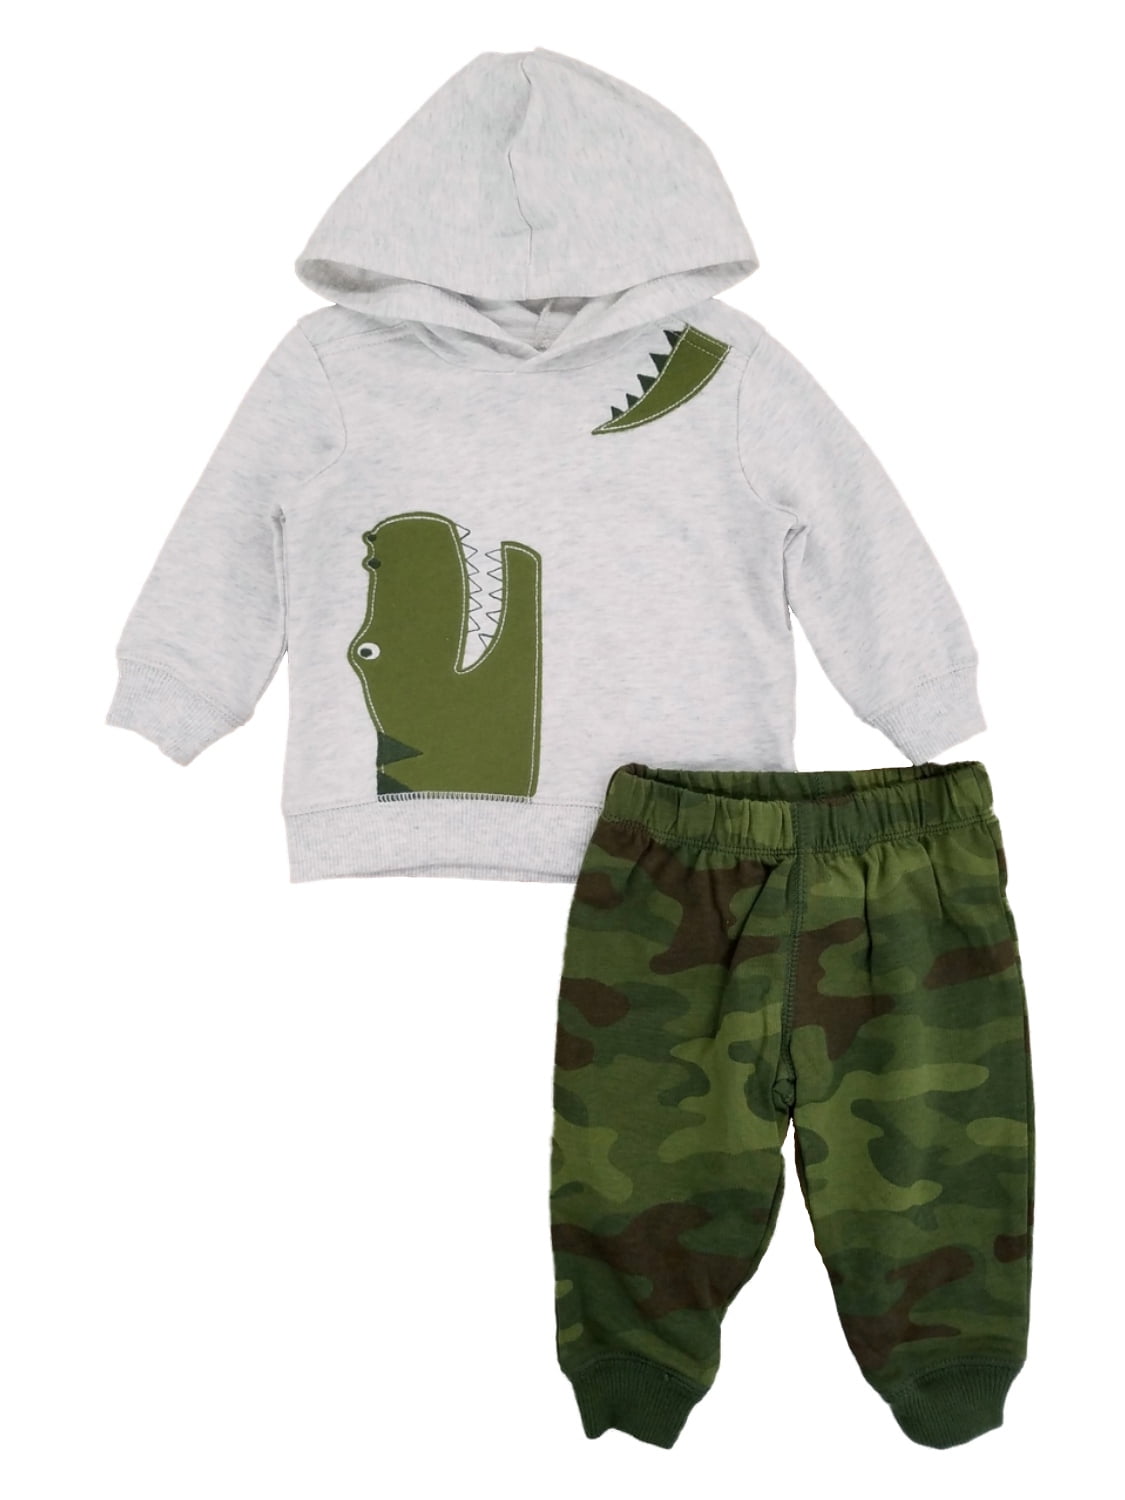 NEW Carters Boys 2pc Outfit Set Camo Hooded Jacket & Sweat Pants Size 4T 